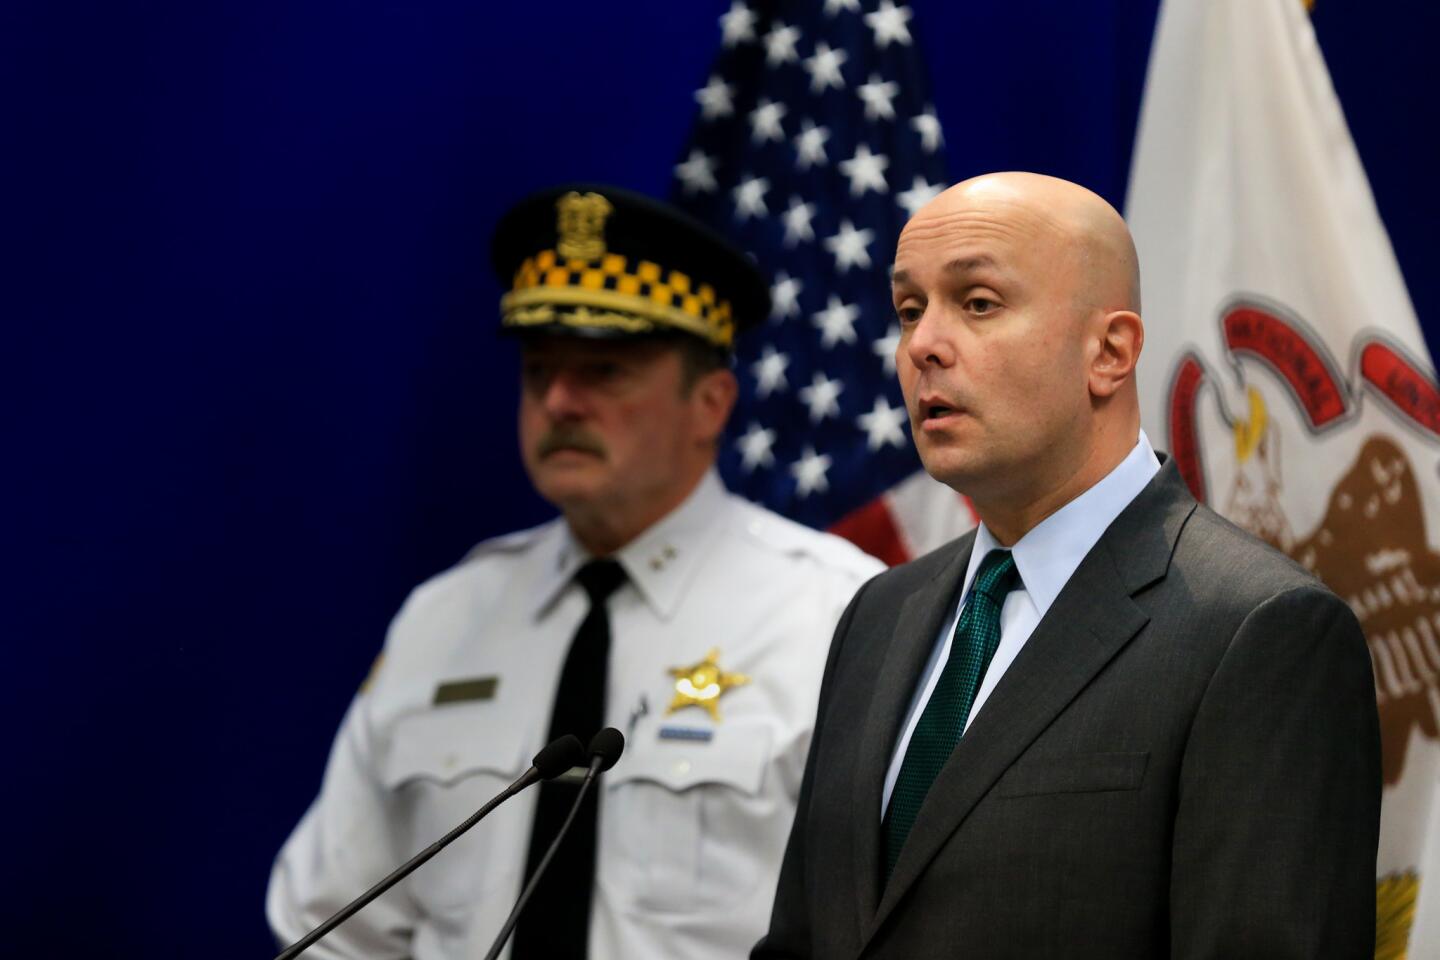 Dean Andrews, right, chief of detectives with the Chicago Police Department, speaks to the media Nov. 2, 2015, about the shooting death of Tyshawn Lee, 9, in the Gresham neighborhood.